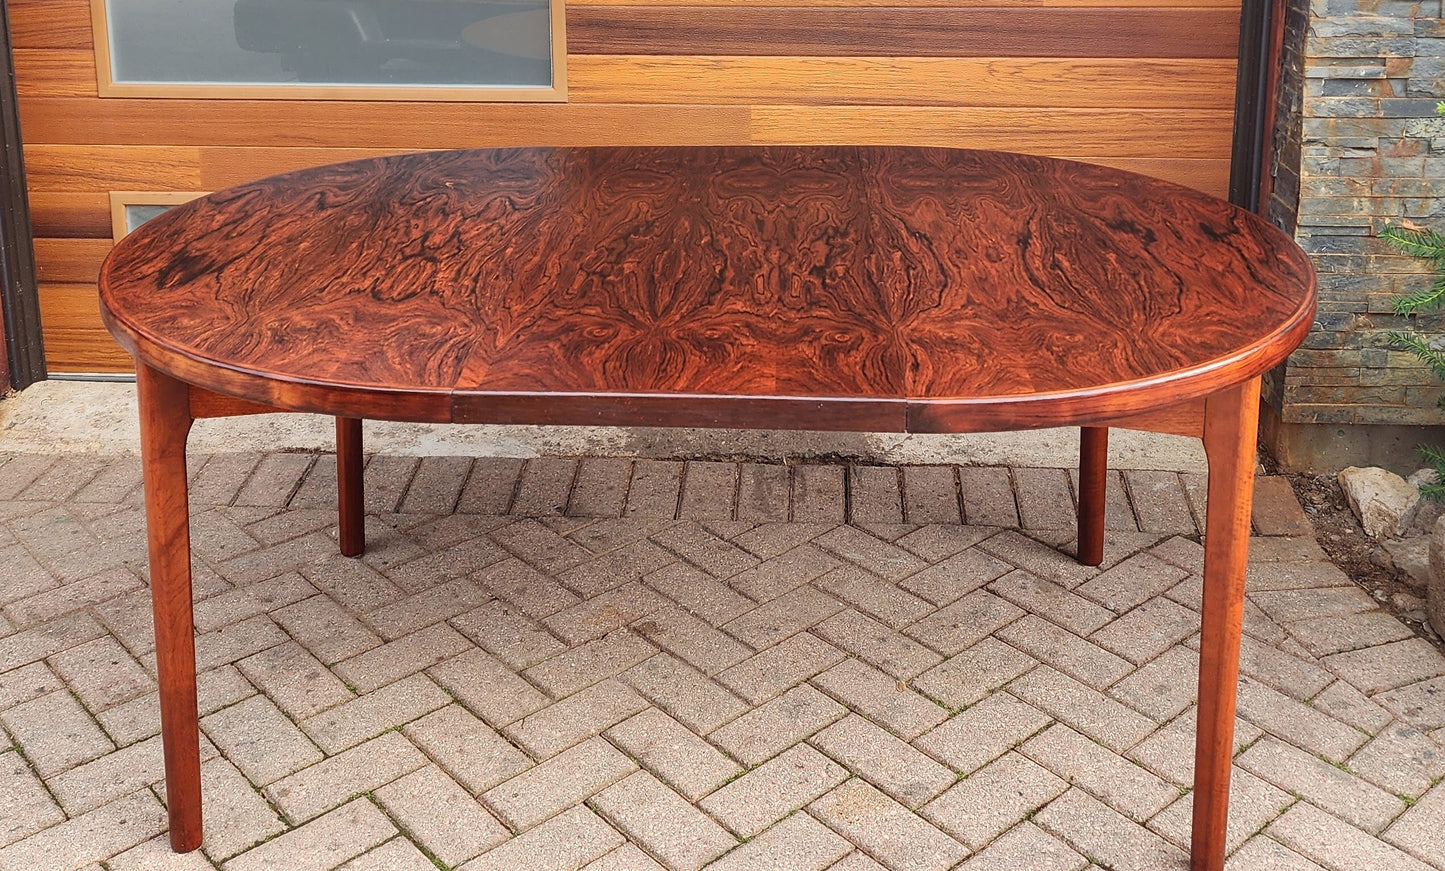 REFINISHED Danish Mid Century Modern Rio Rosewood Table Round to Oval  2 Leaves by H. Kjaernulf 47"-86"